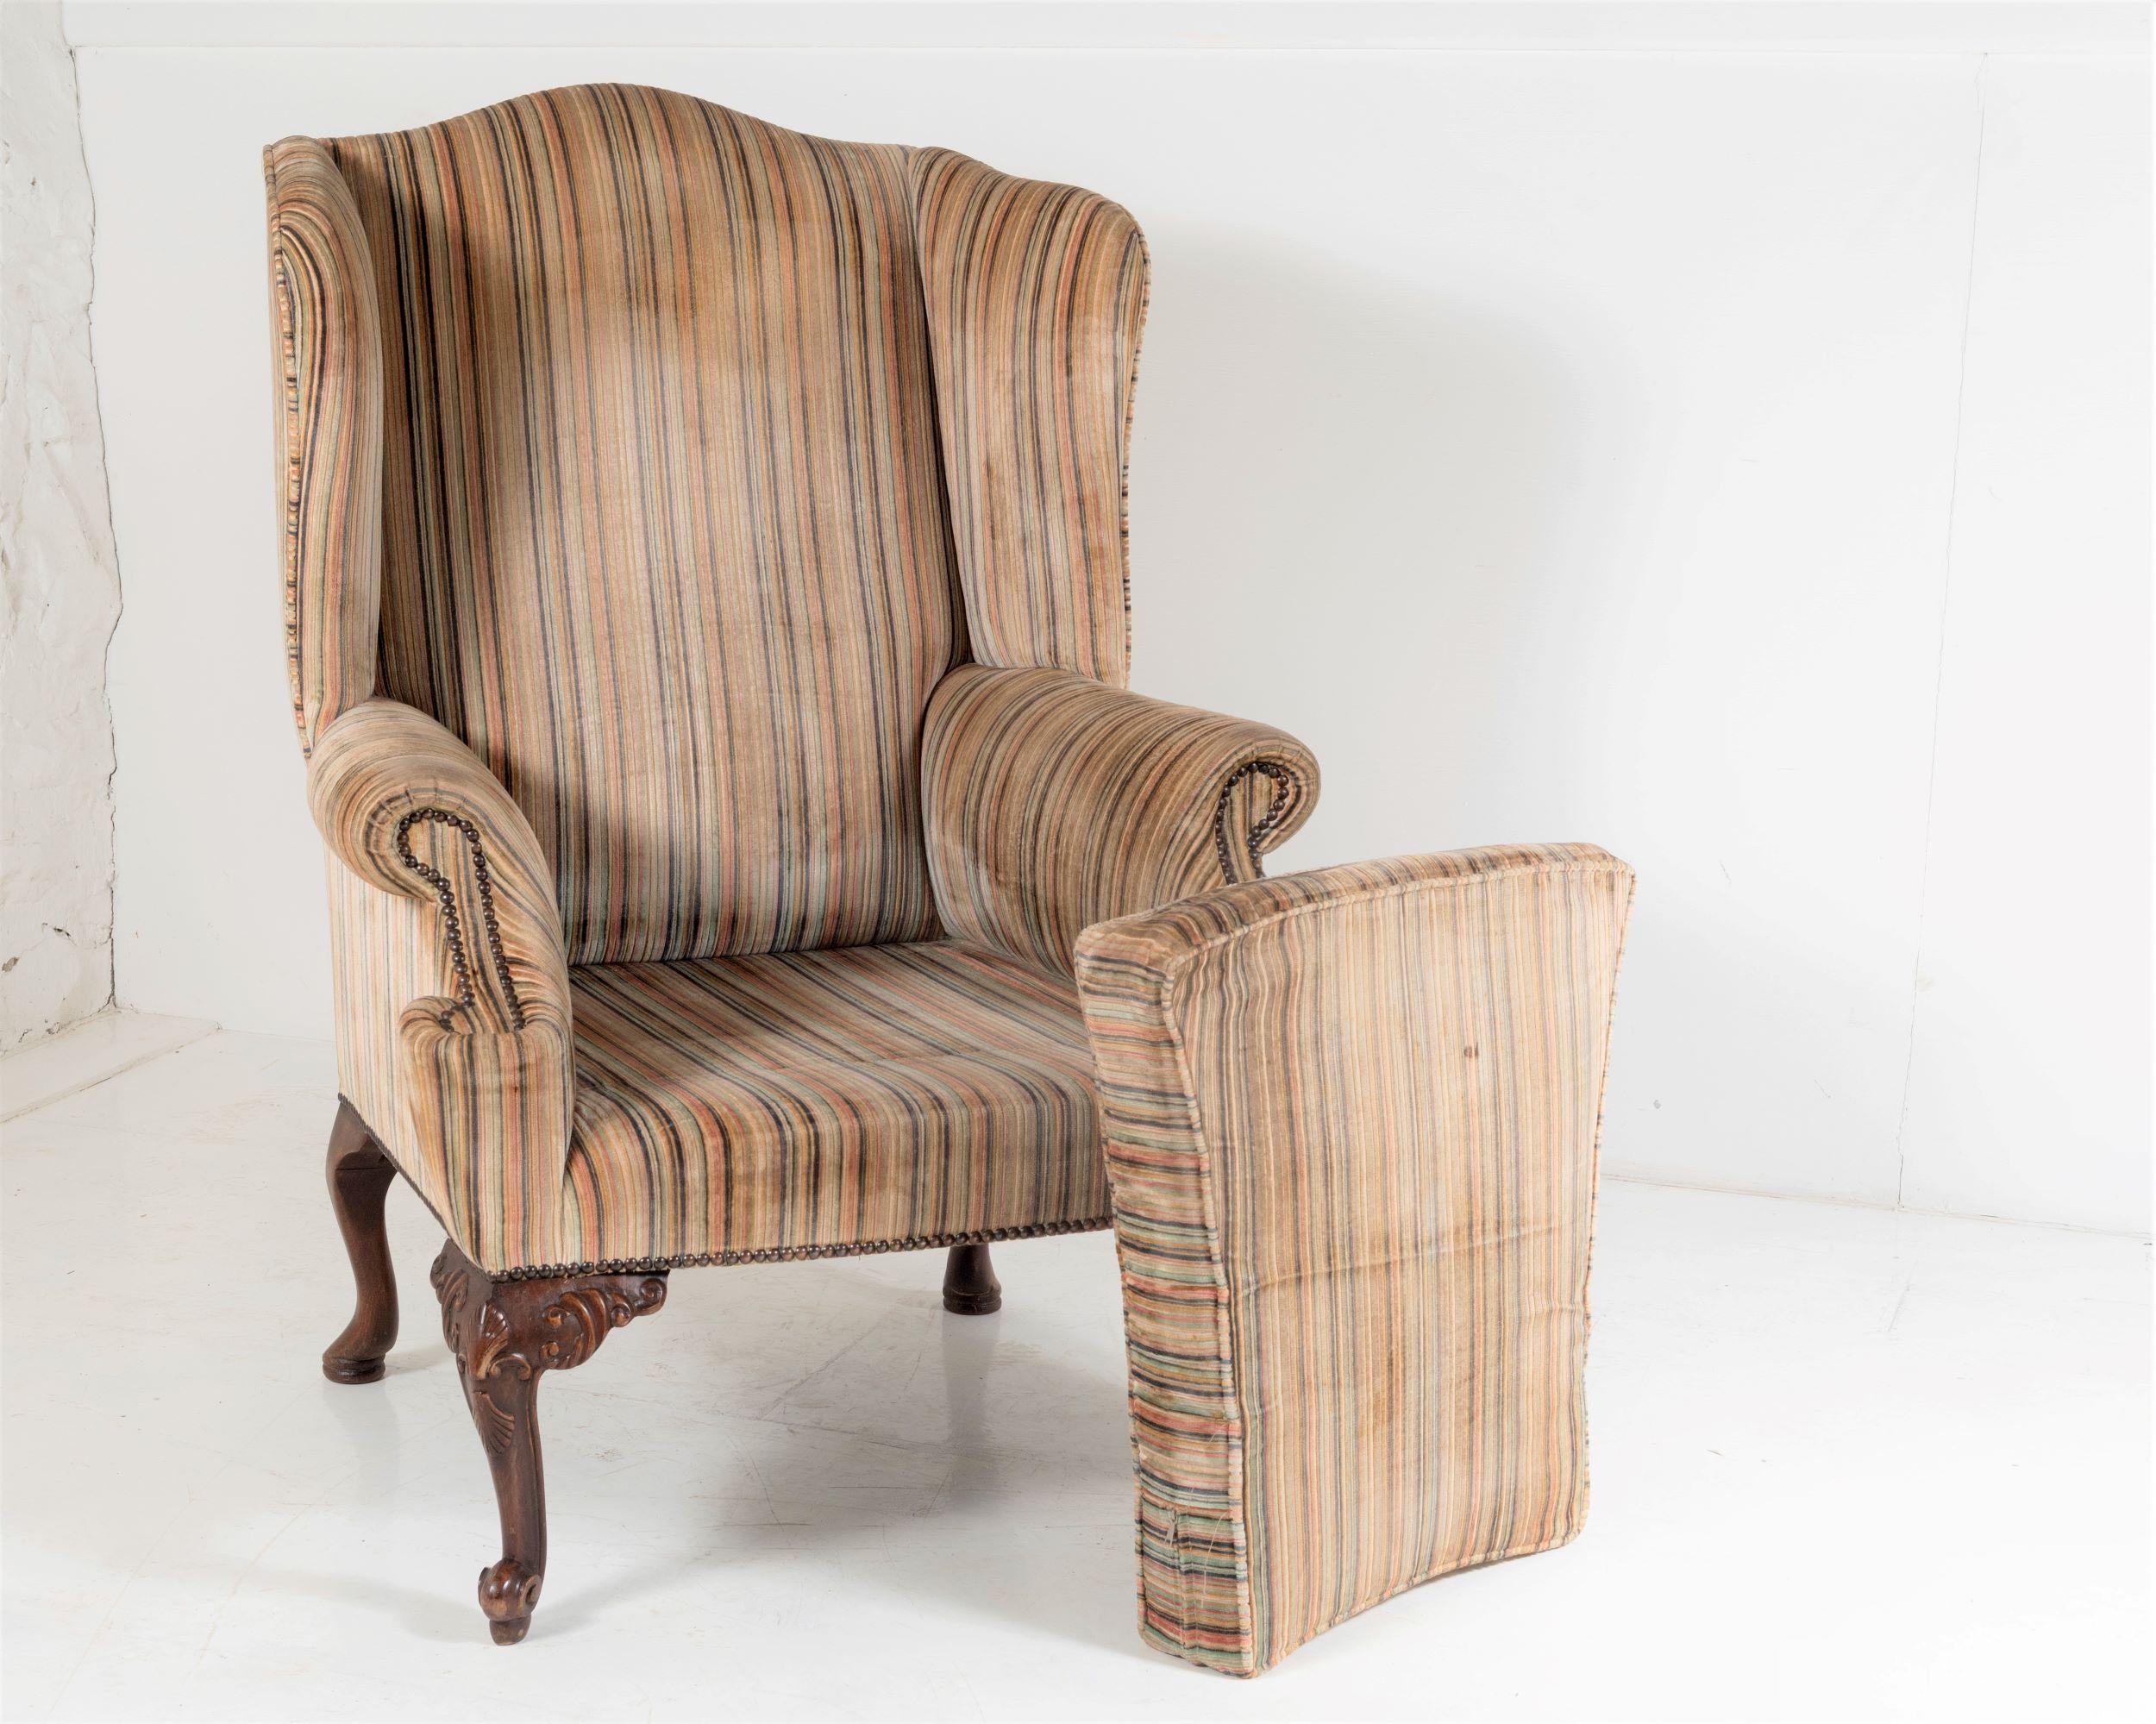 Stylish George III Style Wing Back Armchair in Original Striped Upholstery For Sale 7